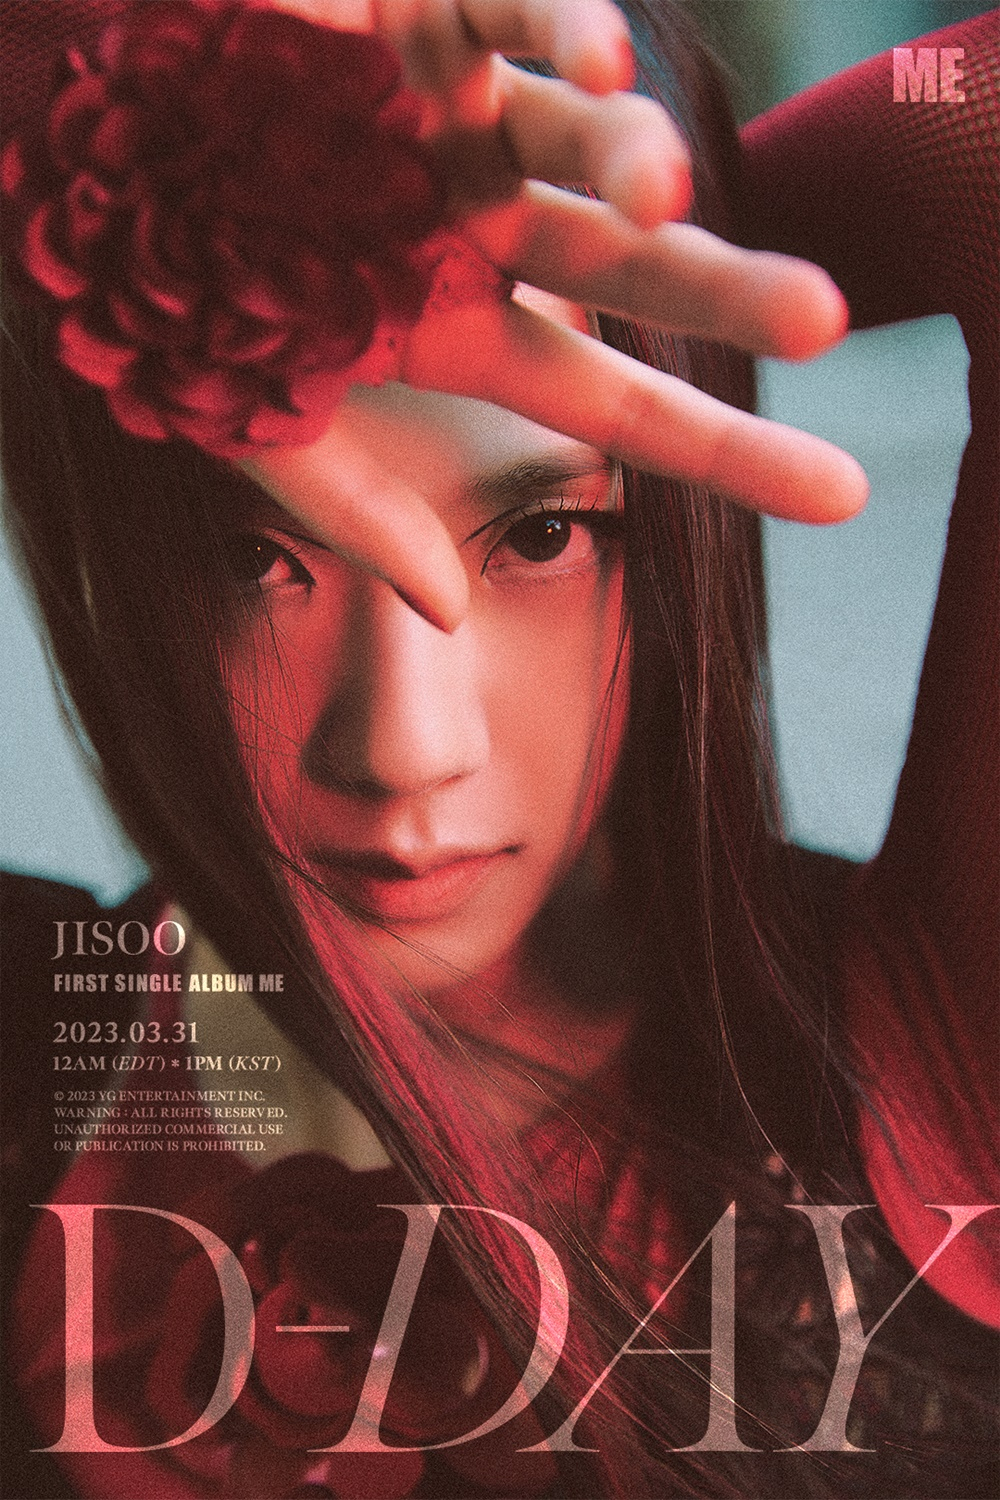 The D-day poster for Blackpink member Jisoo's solo debut single 